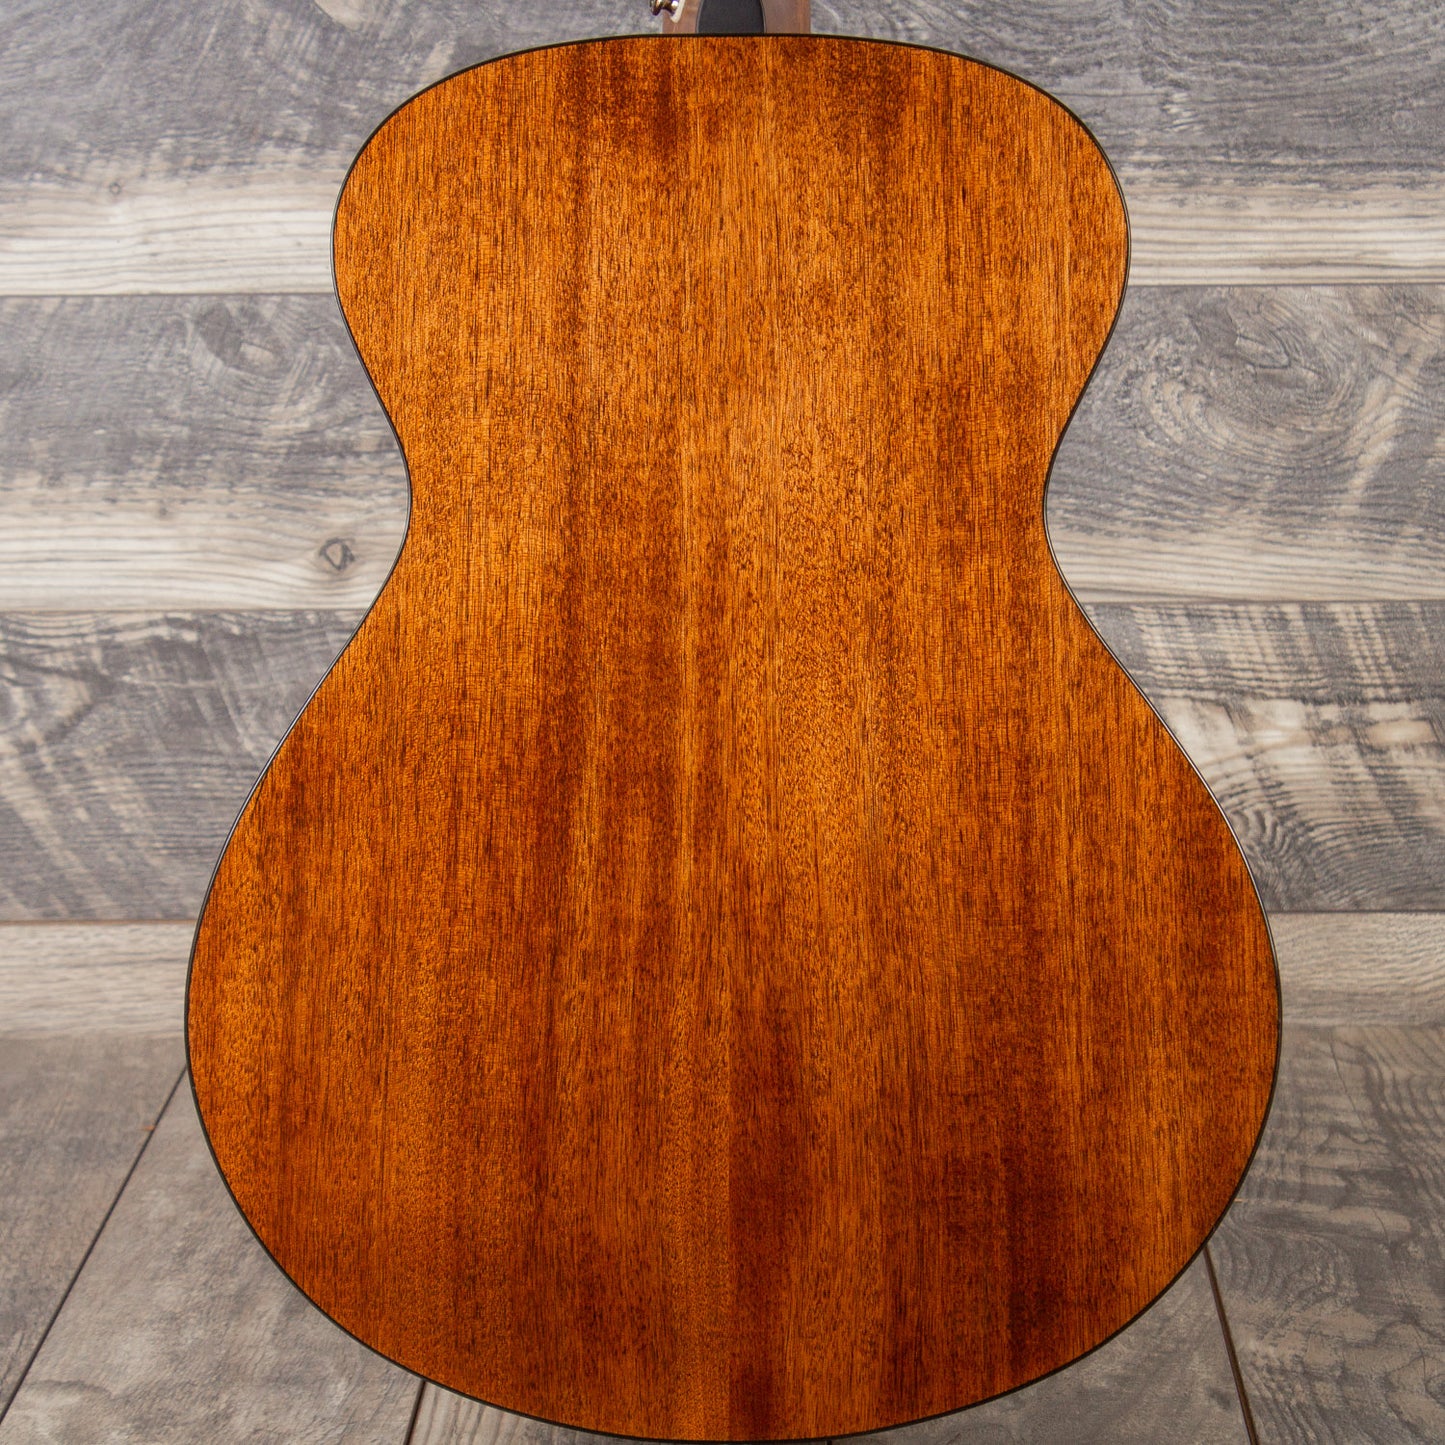 2019 Breedlove Discovery Concert - Natural